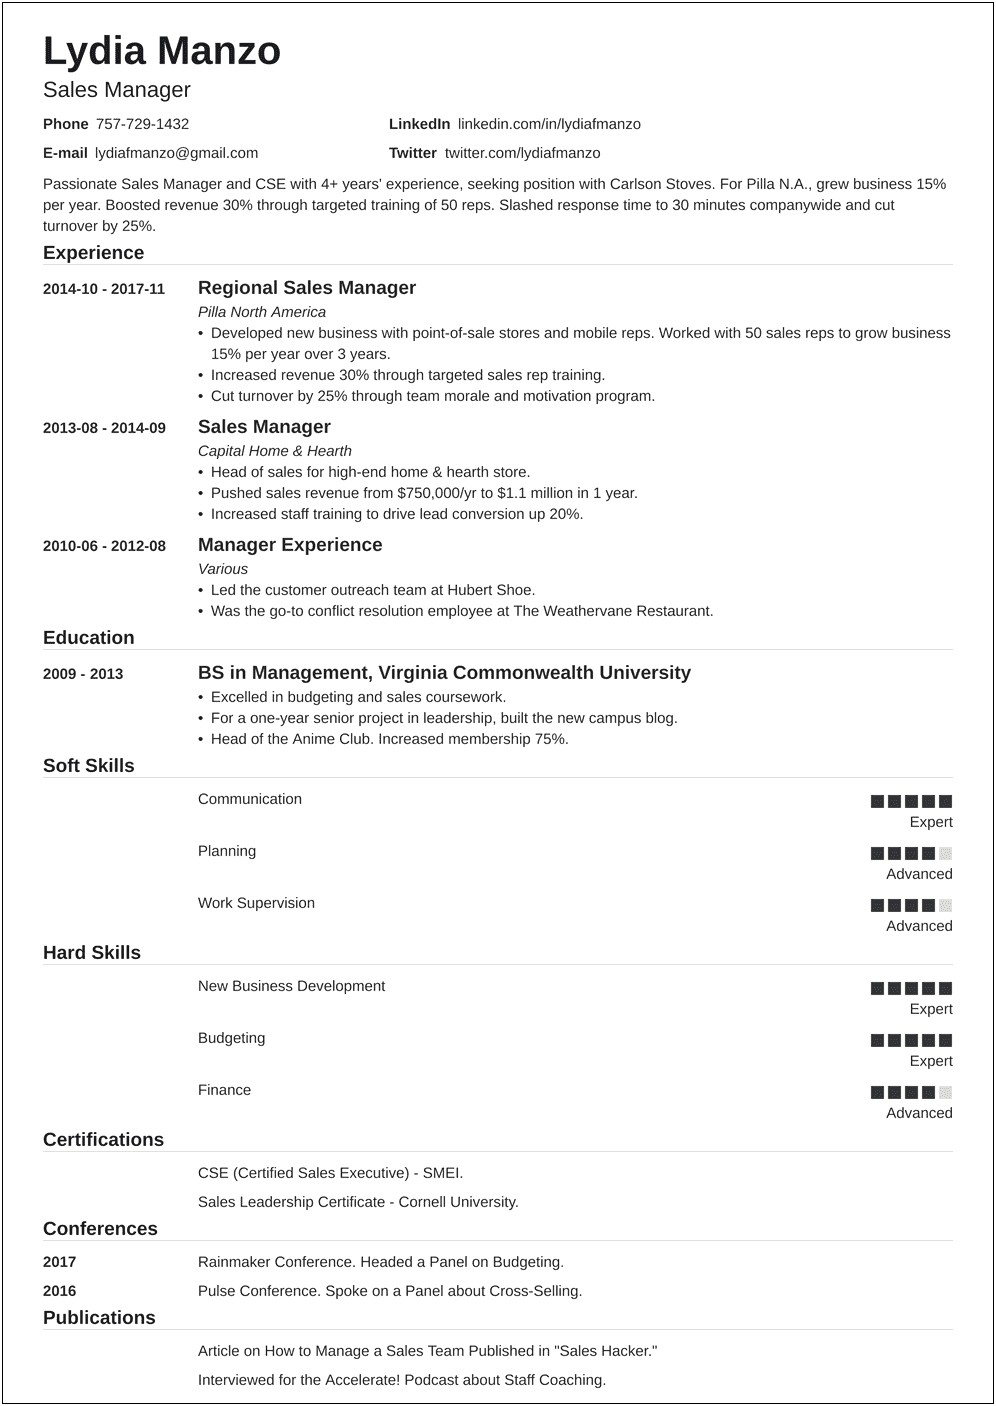 Listing Management Experience On Resume